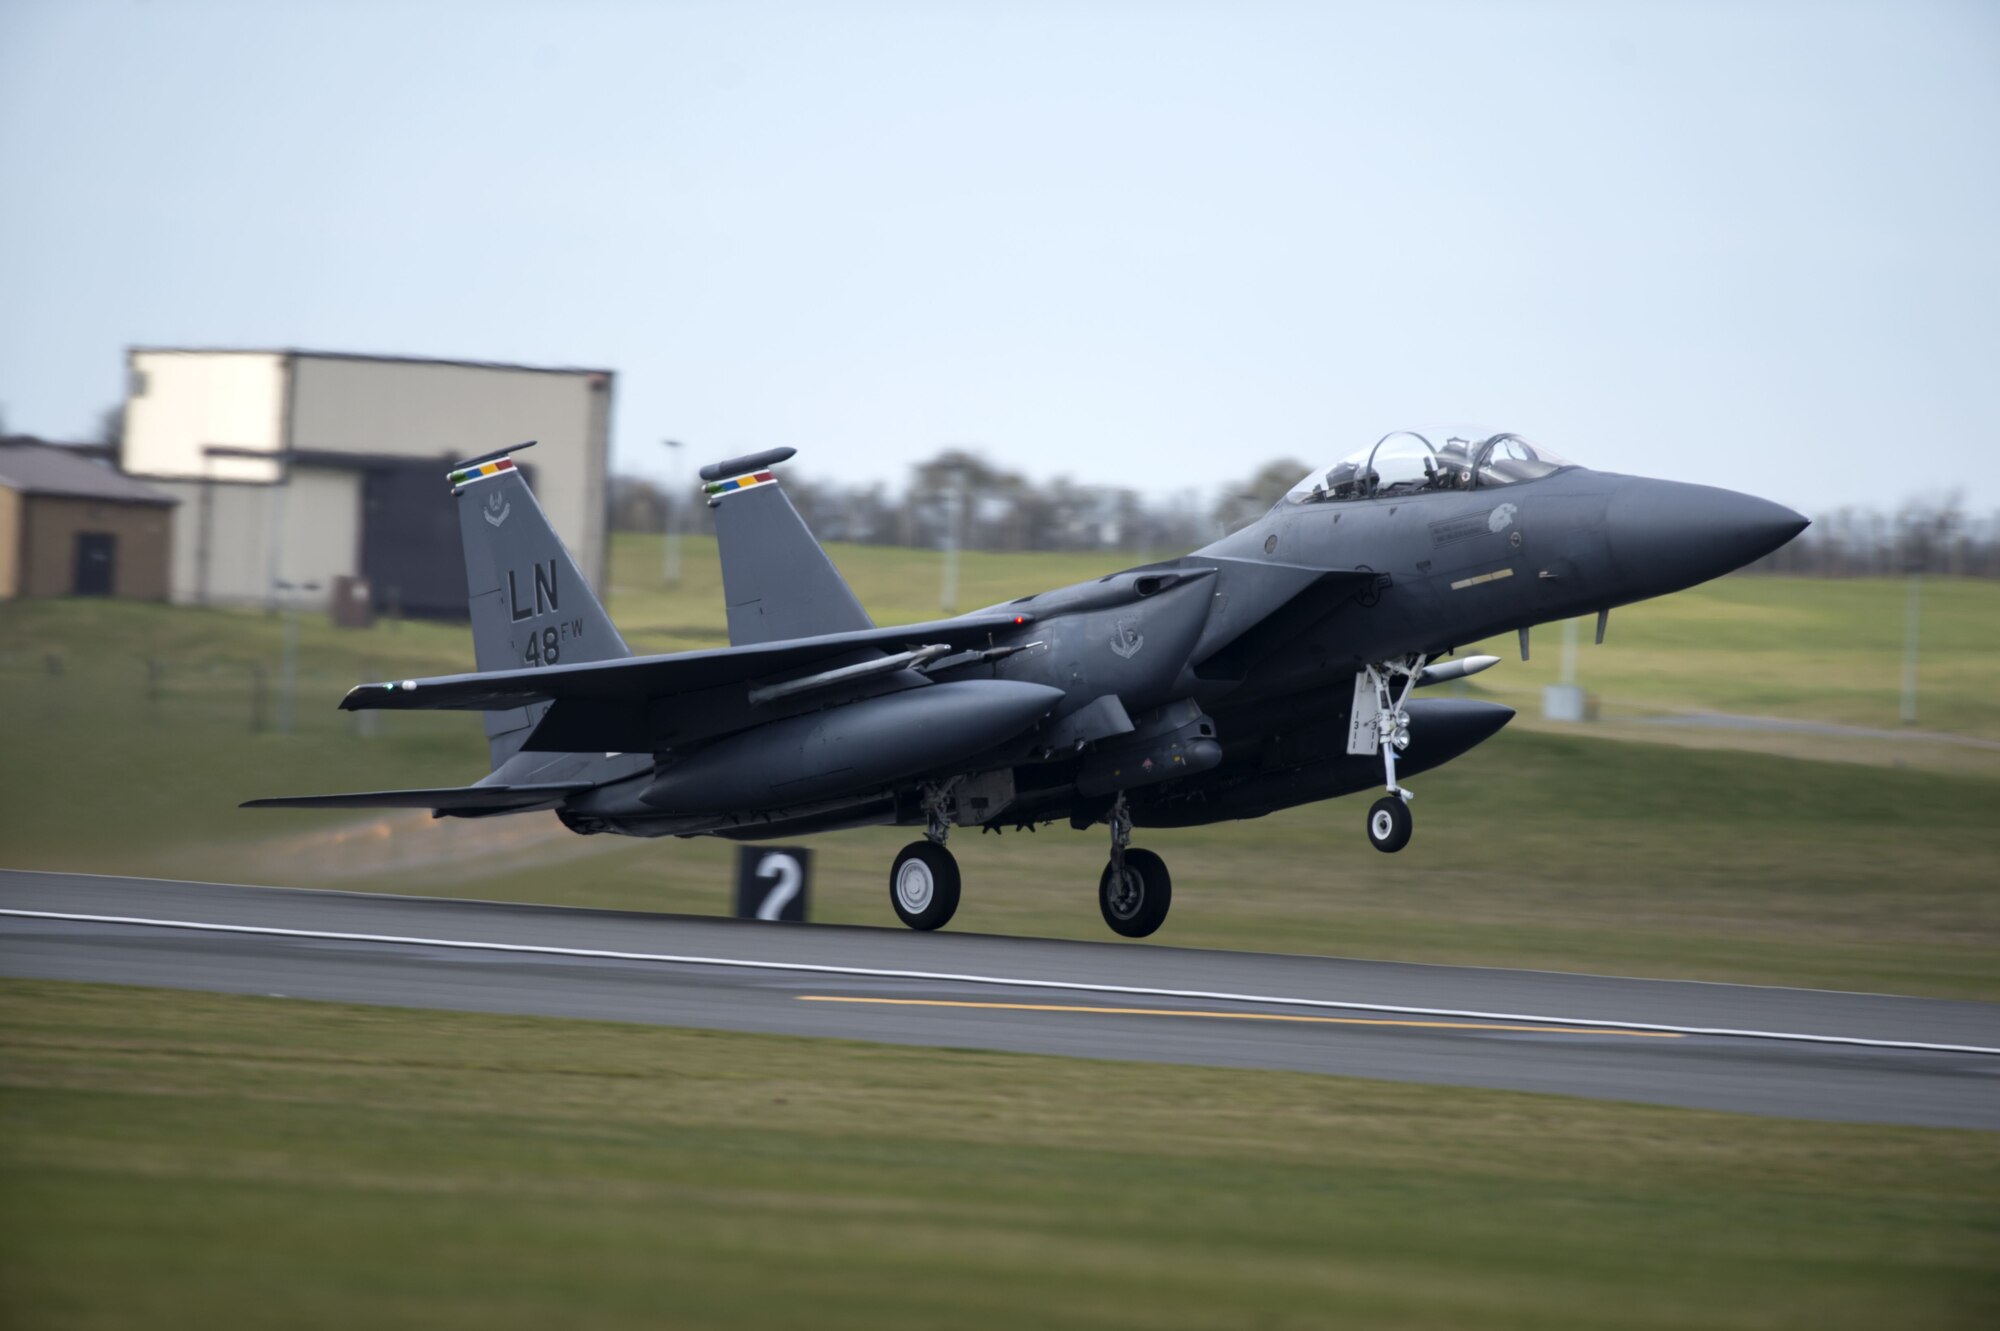 An F-15E Strike Eagle flying the colors of multiple 48th Fighter Wing squadrons takes off from Royal Air Force Lakenheath, England, Feb. 6, 2018. The array of colors identifies it as the 48th FW commander’s aircraft.  An array of avionics and electronics systems gives the F-15E the capability to fight at low altitude, day or night, and in all weather. (U.S. Air Force photo/Senior Airman Malcolm Mayfield)